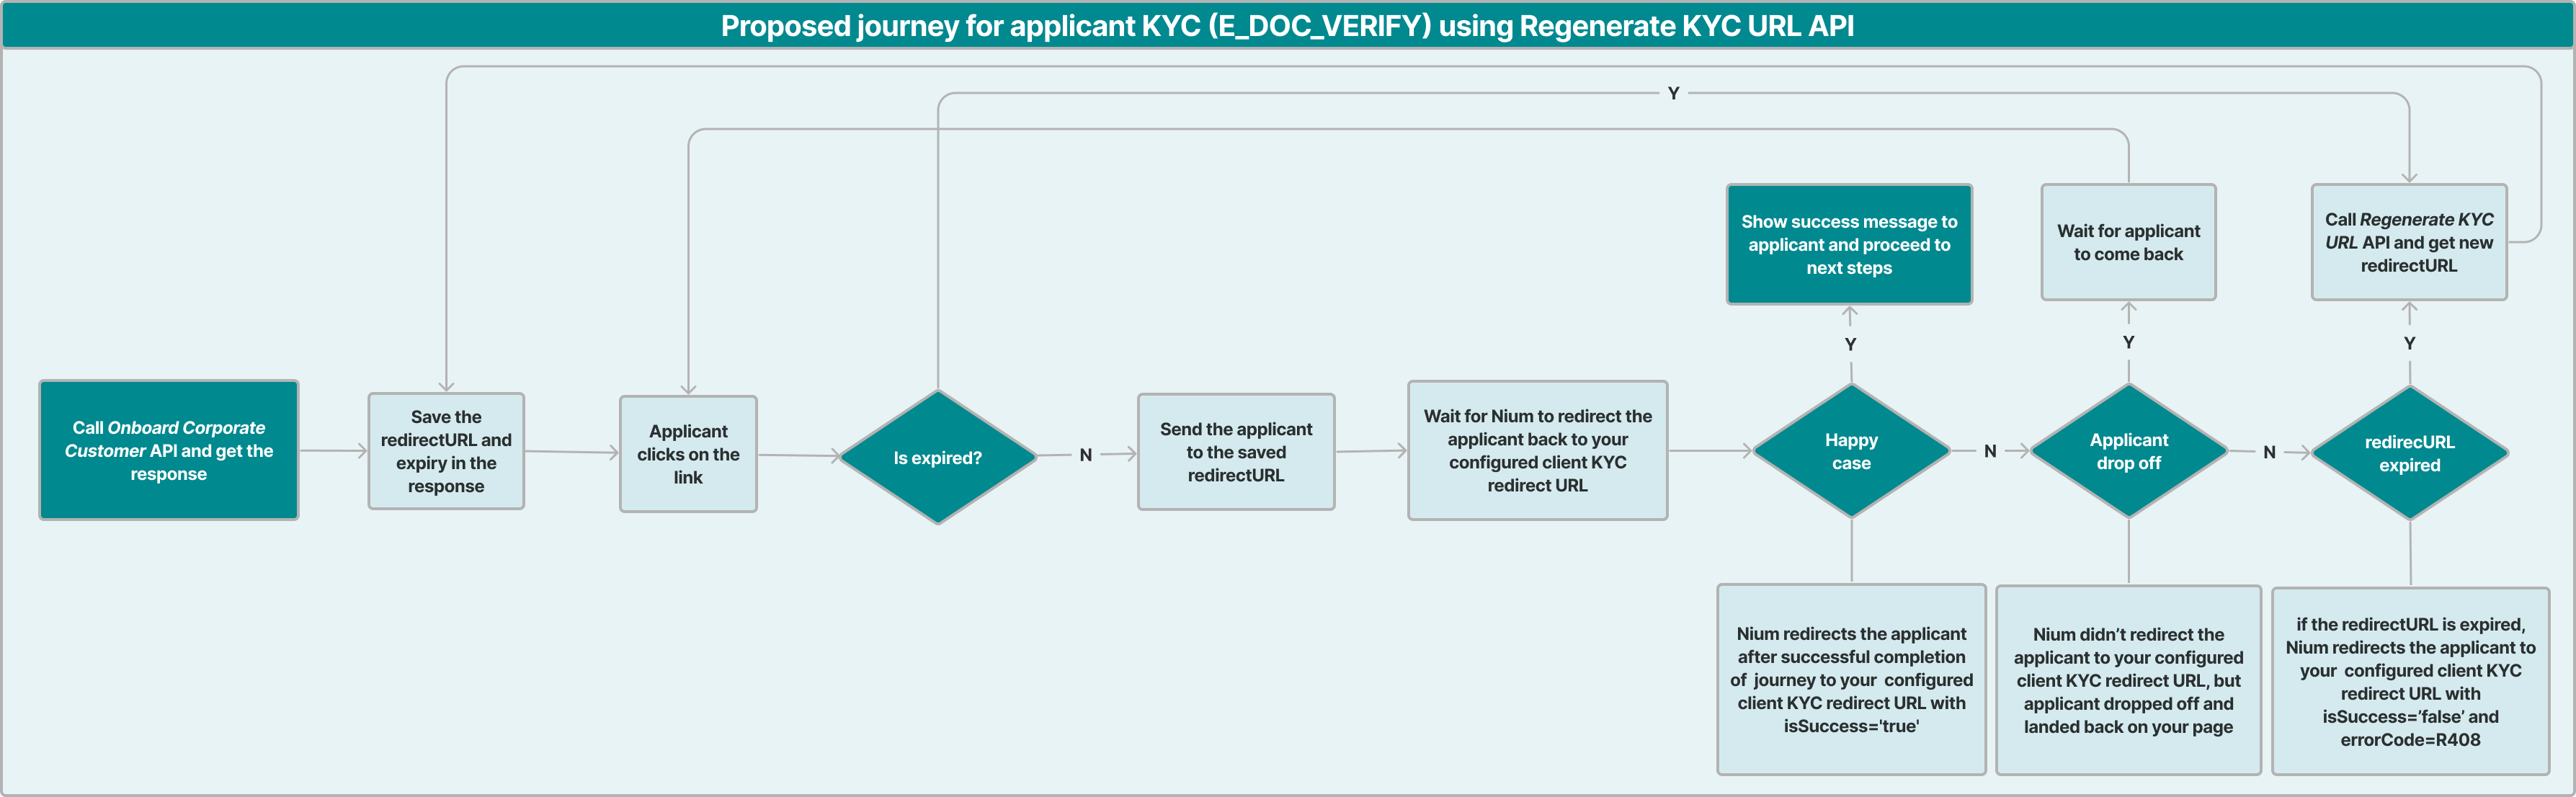 An image of the proposed journey for applicant KYC